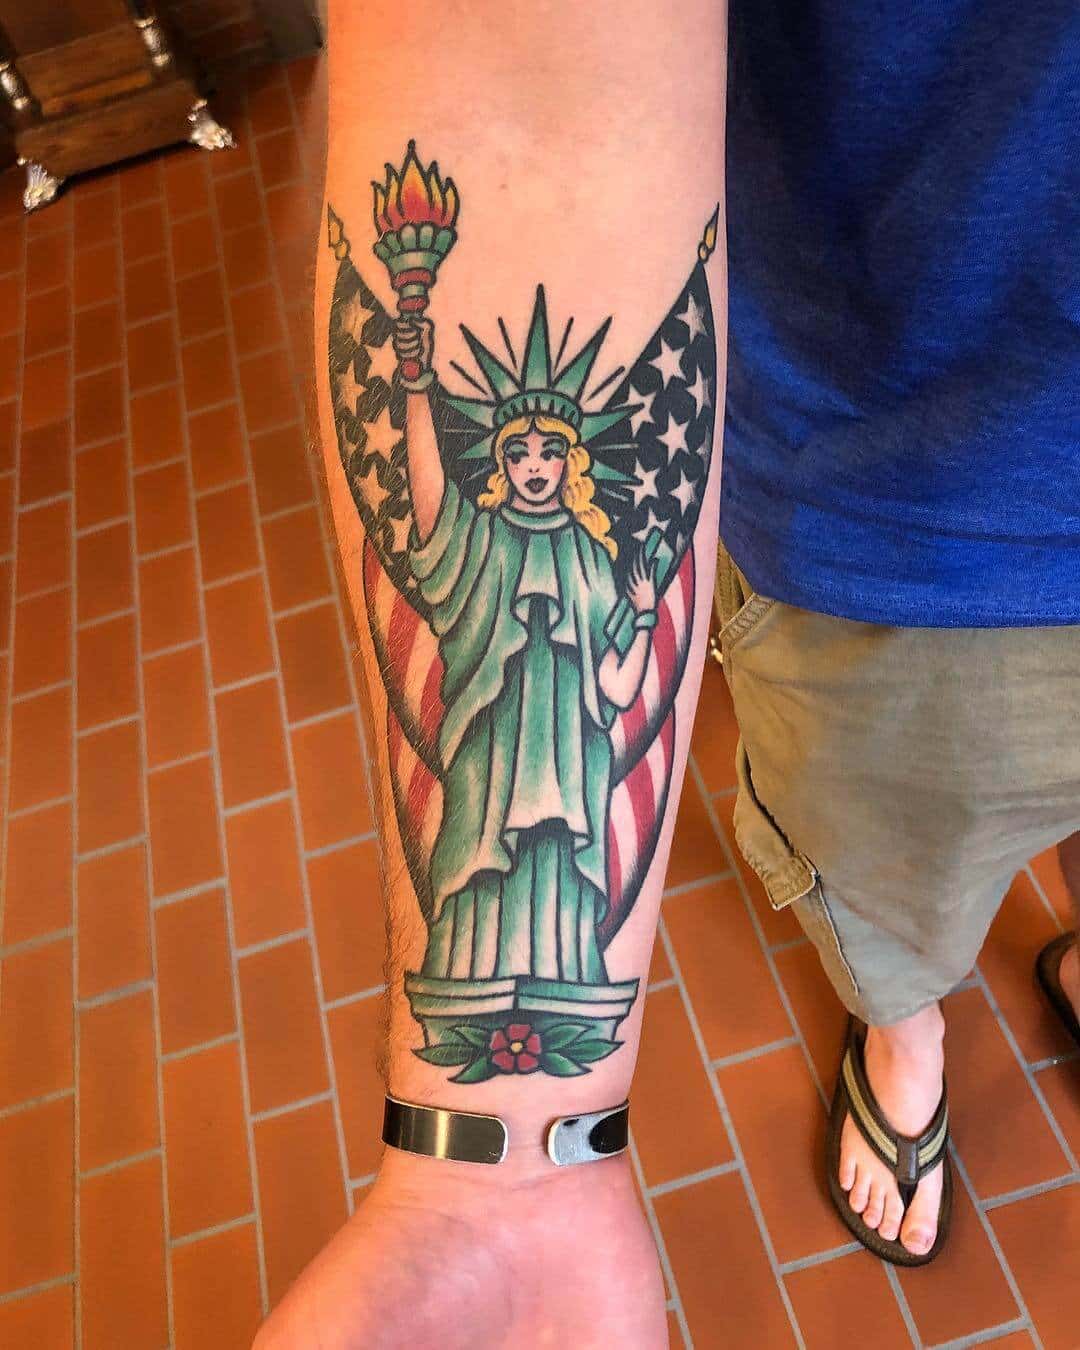 The Statue of Liberty tattoo